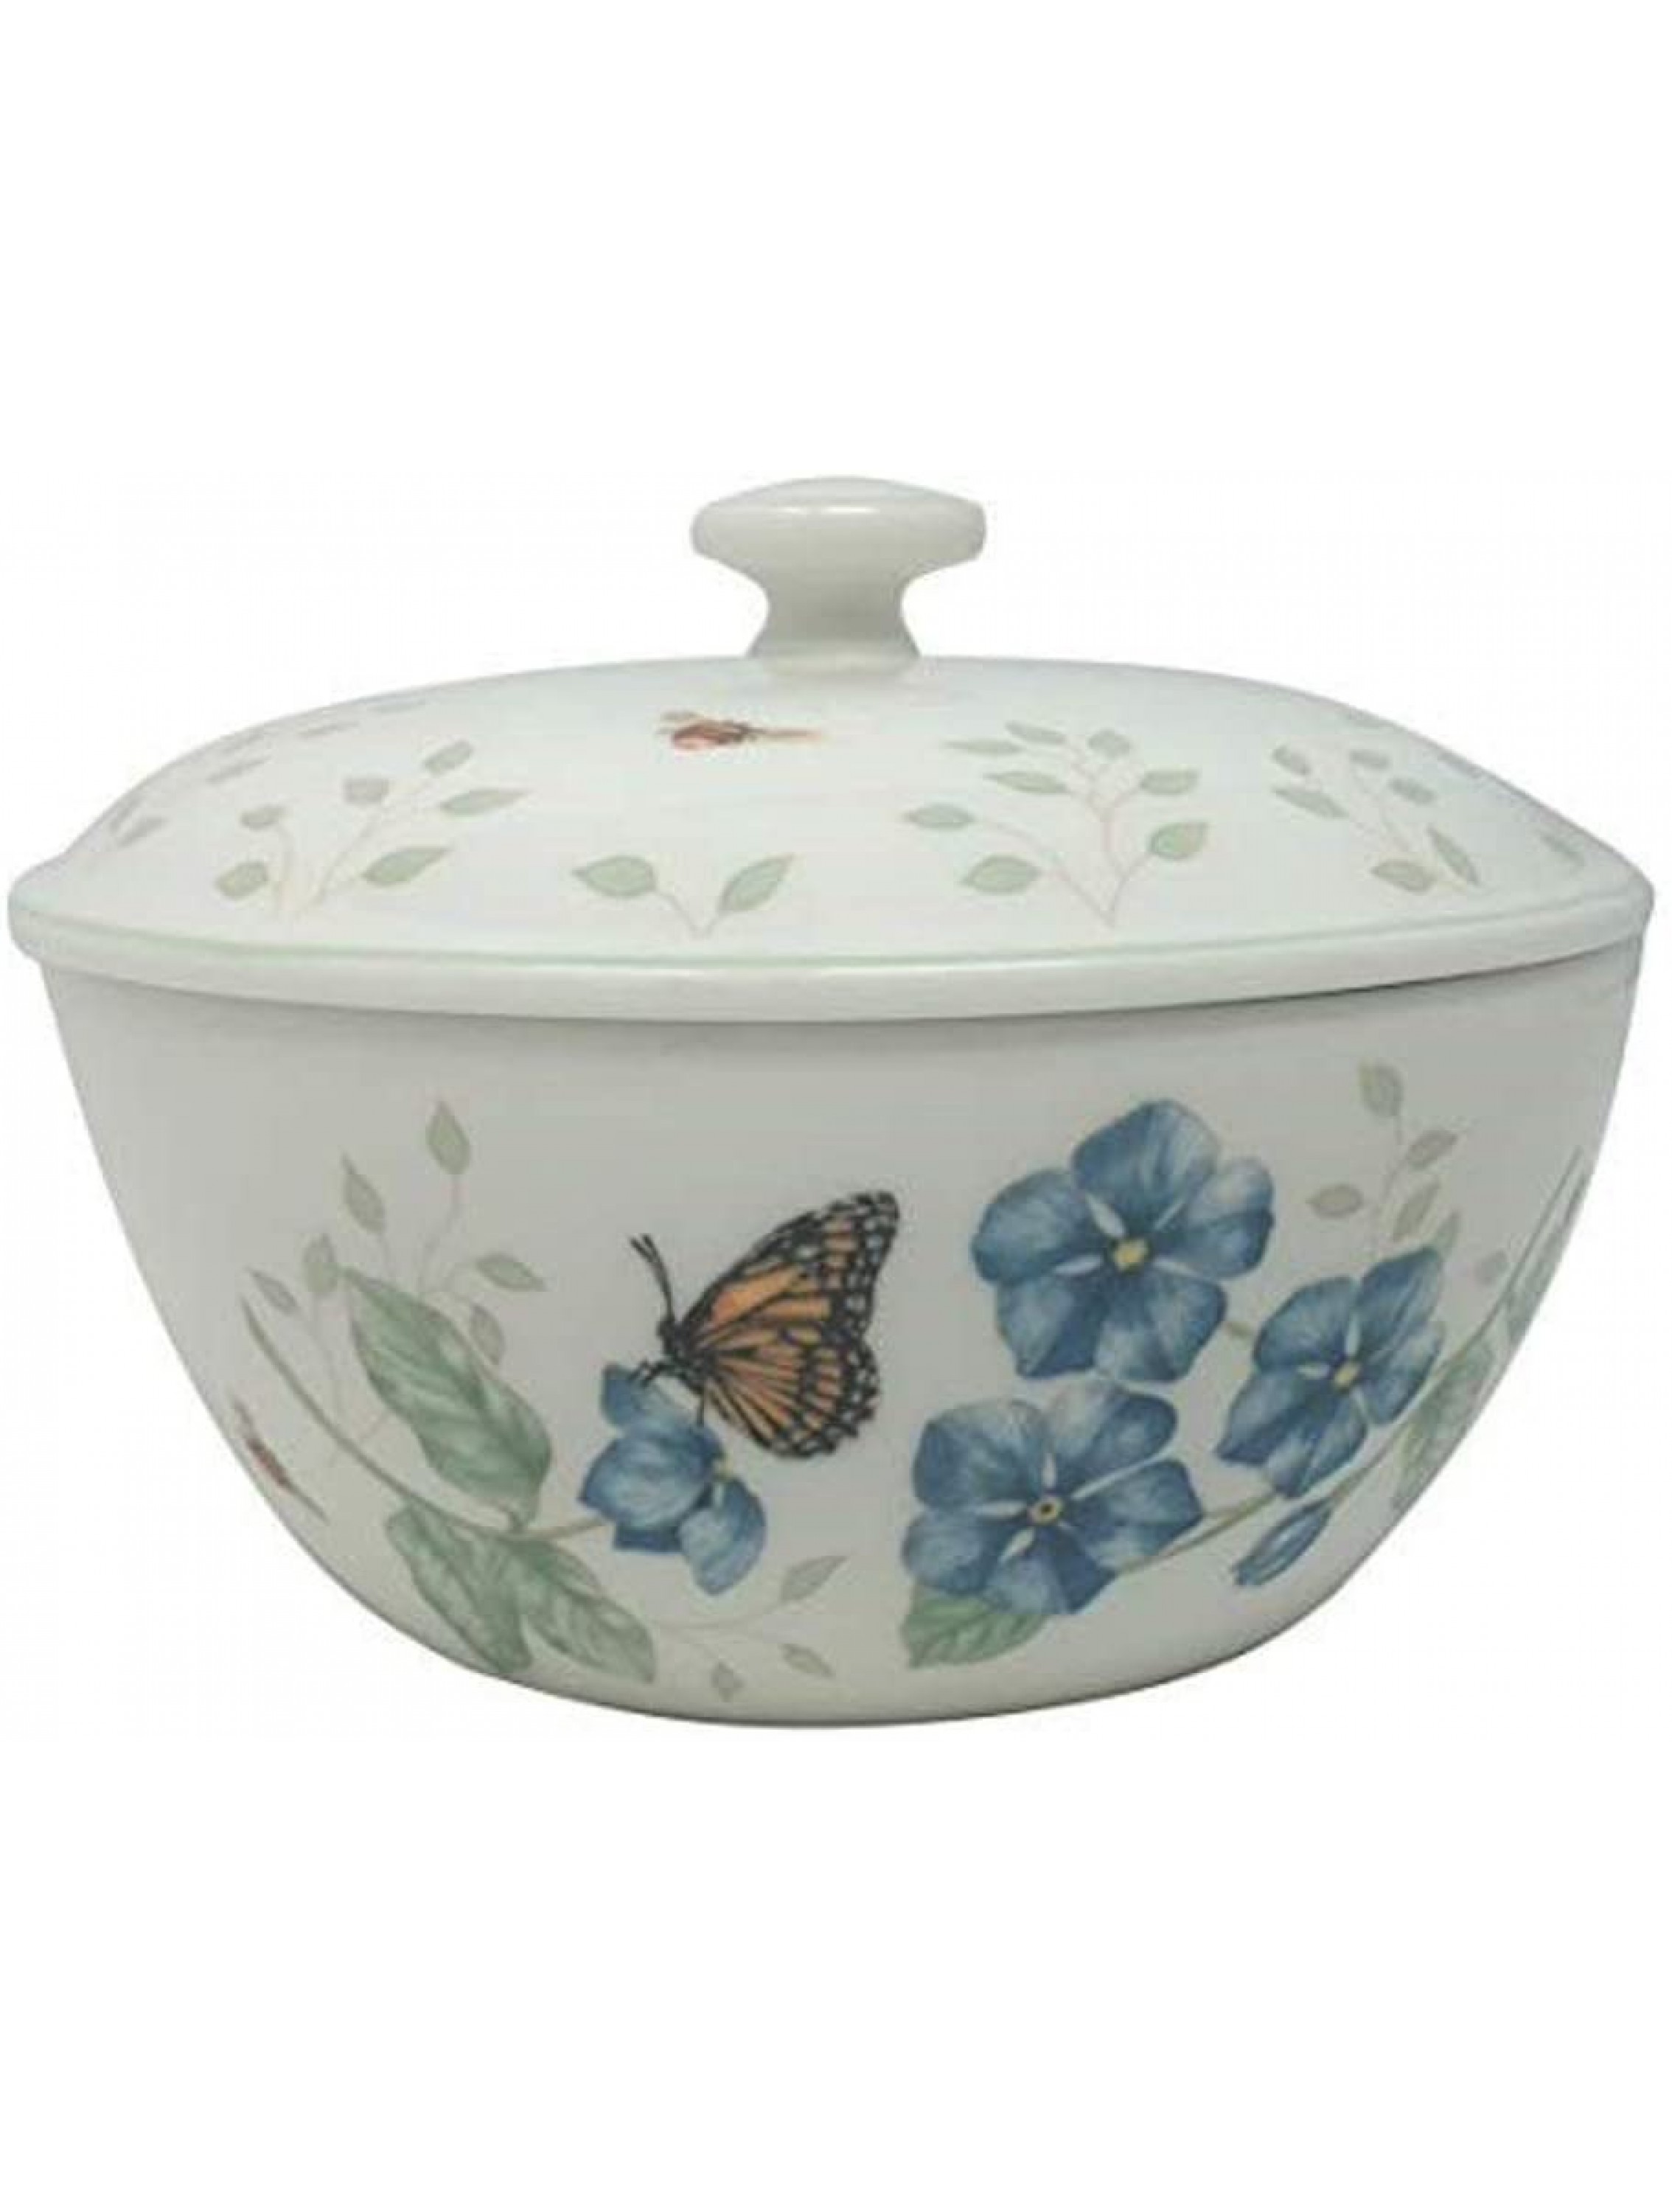 Lenox Butterfly Meadow Covered Lidded Casserole Dish New with Tag Porcelain - BOWPGG2D0